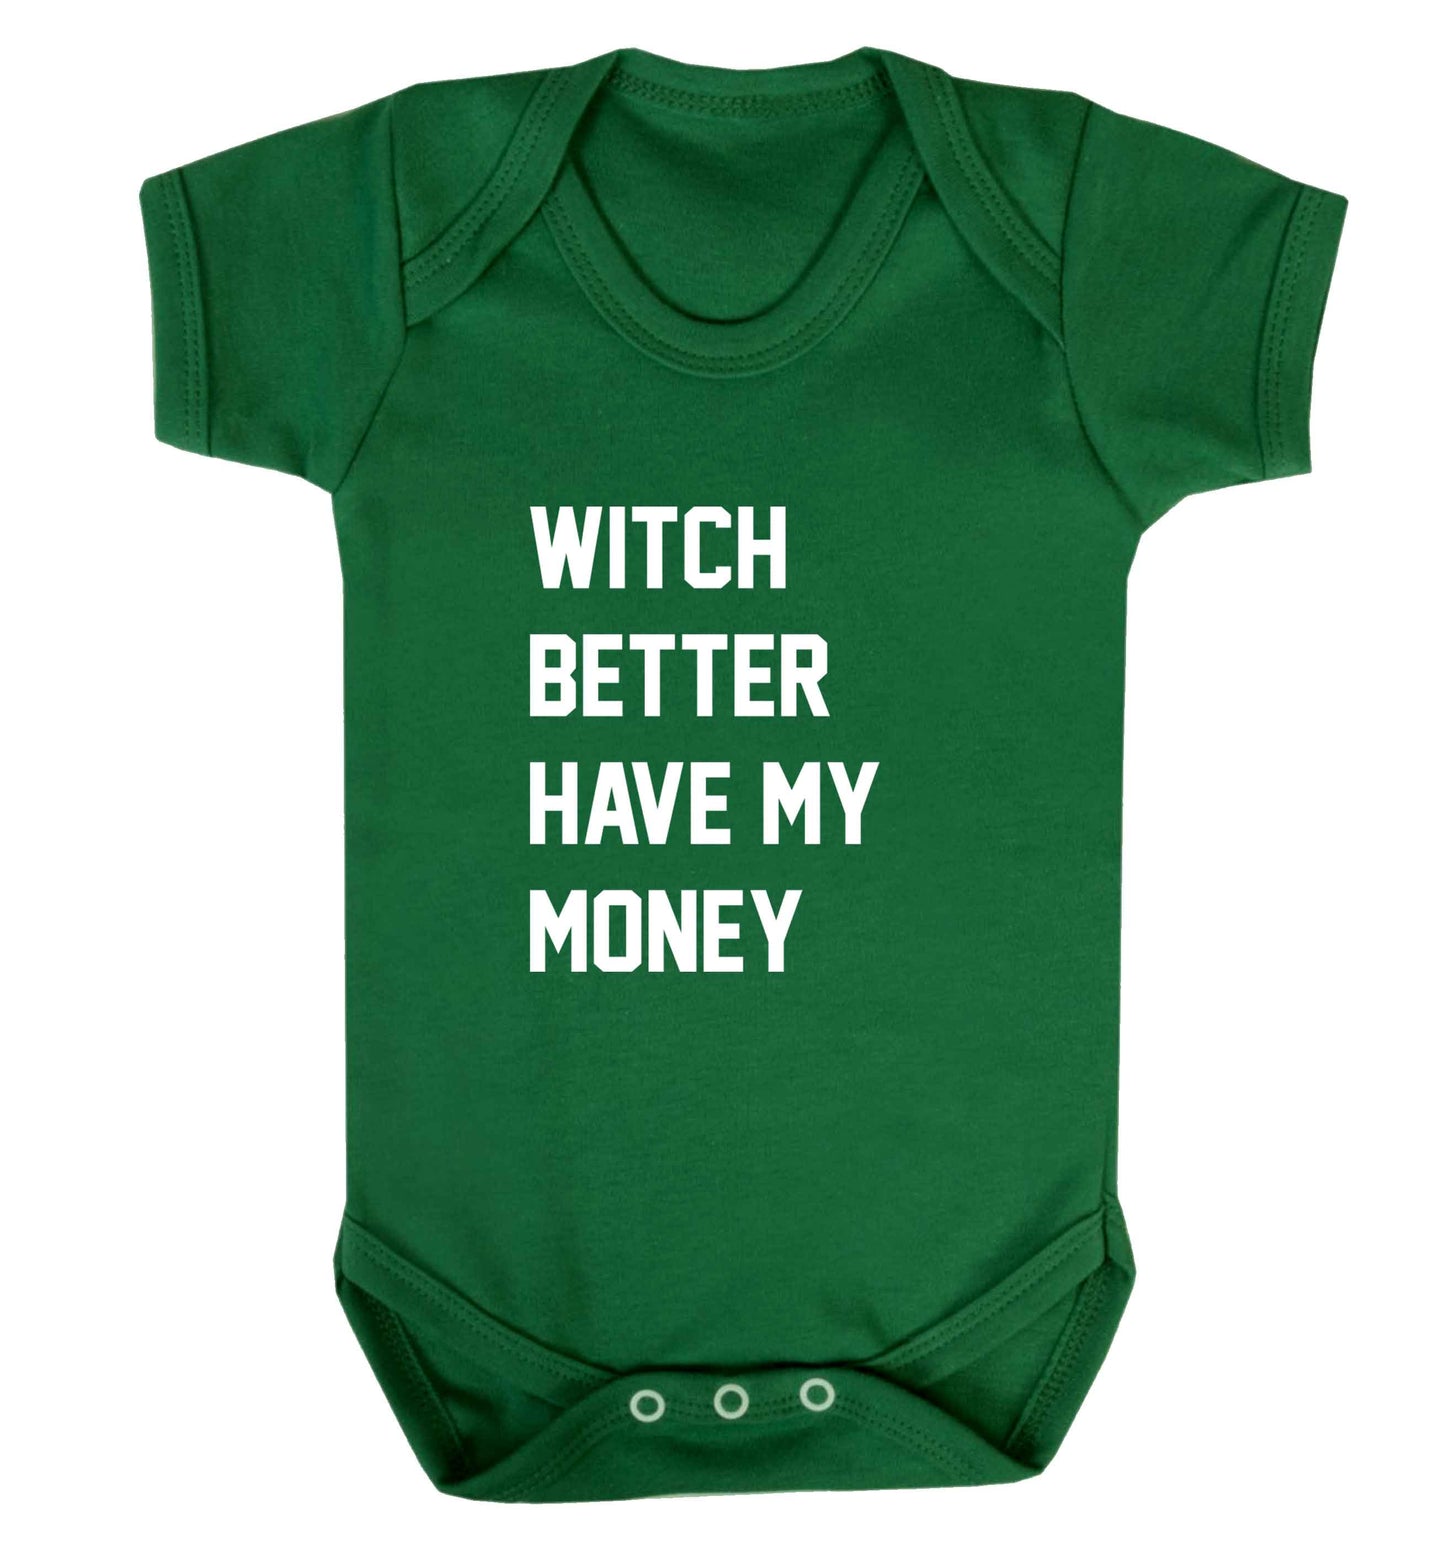 Witch better have my money baby vest green 18-24 months